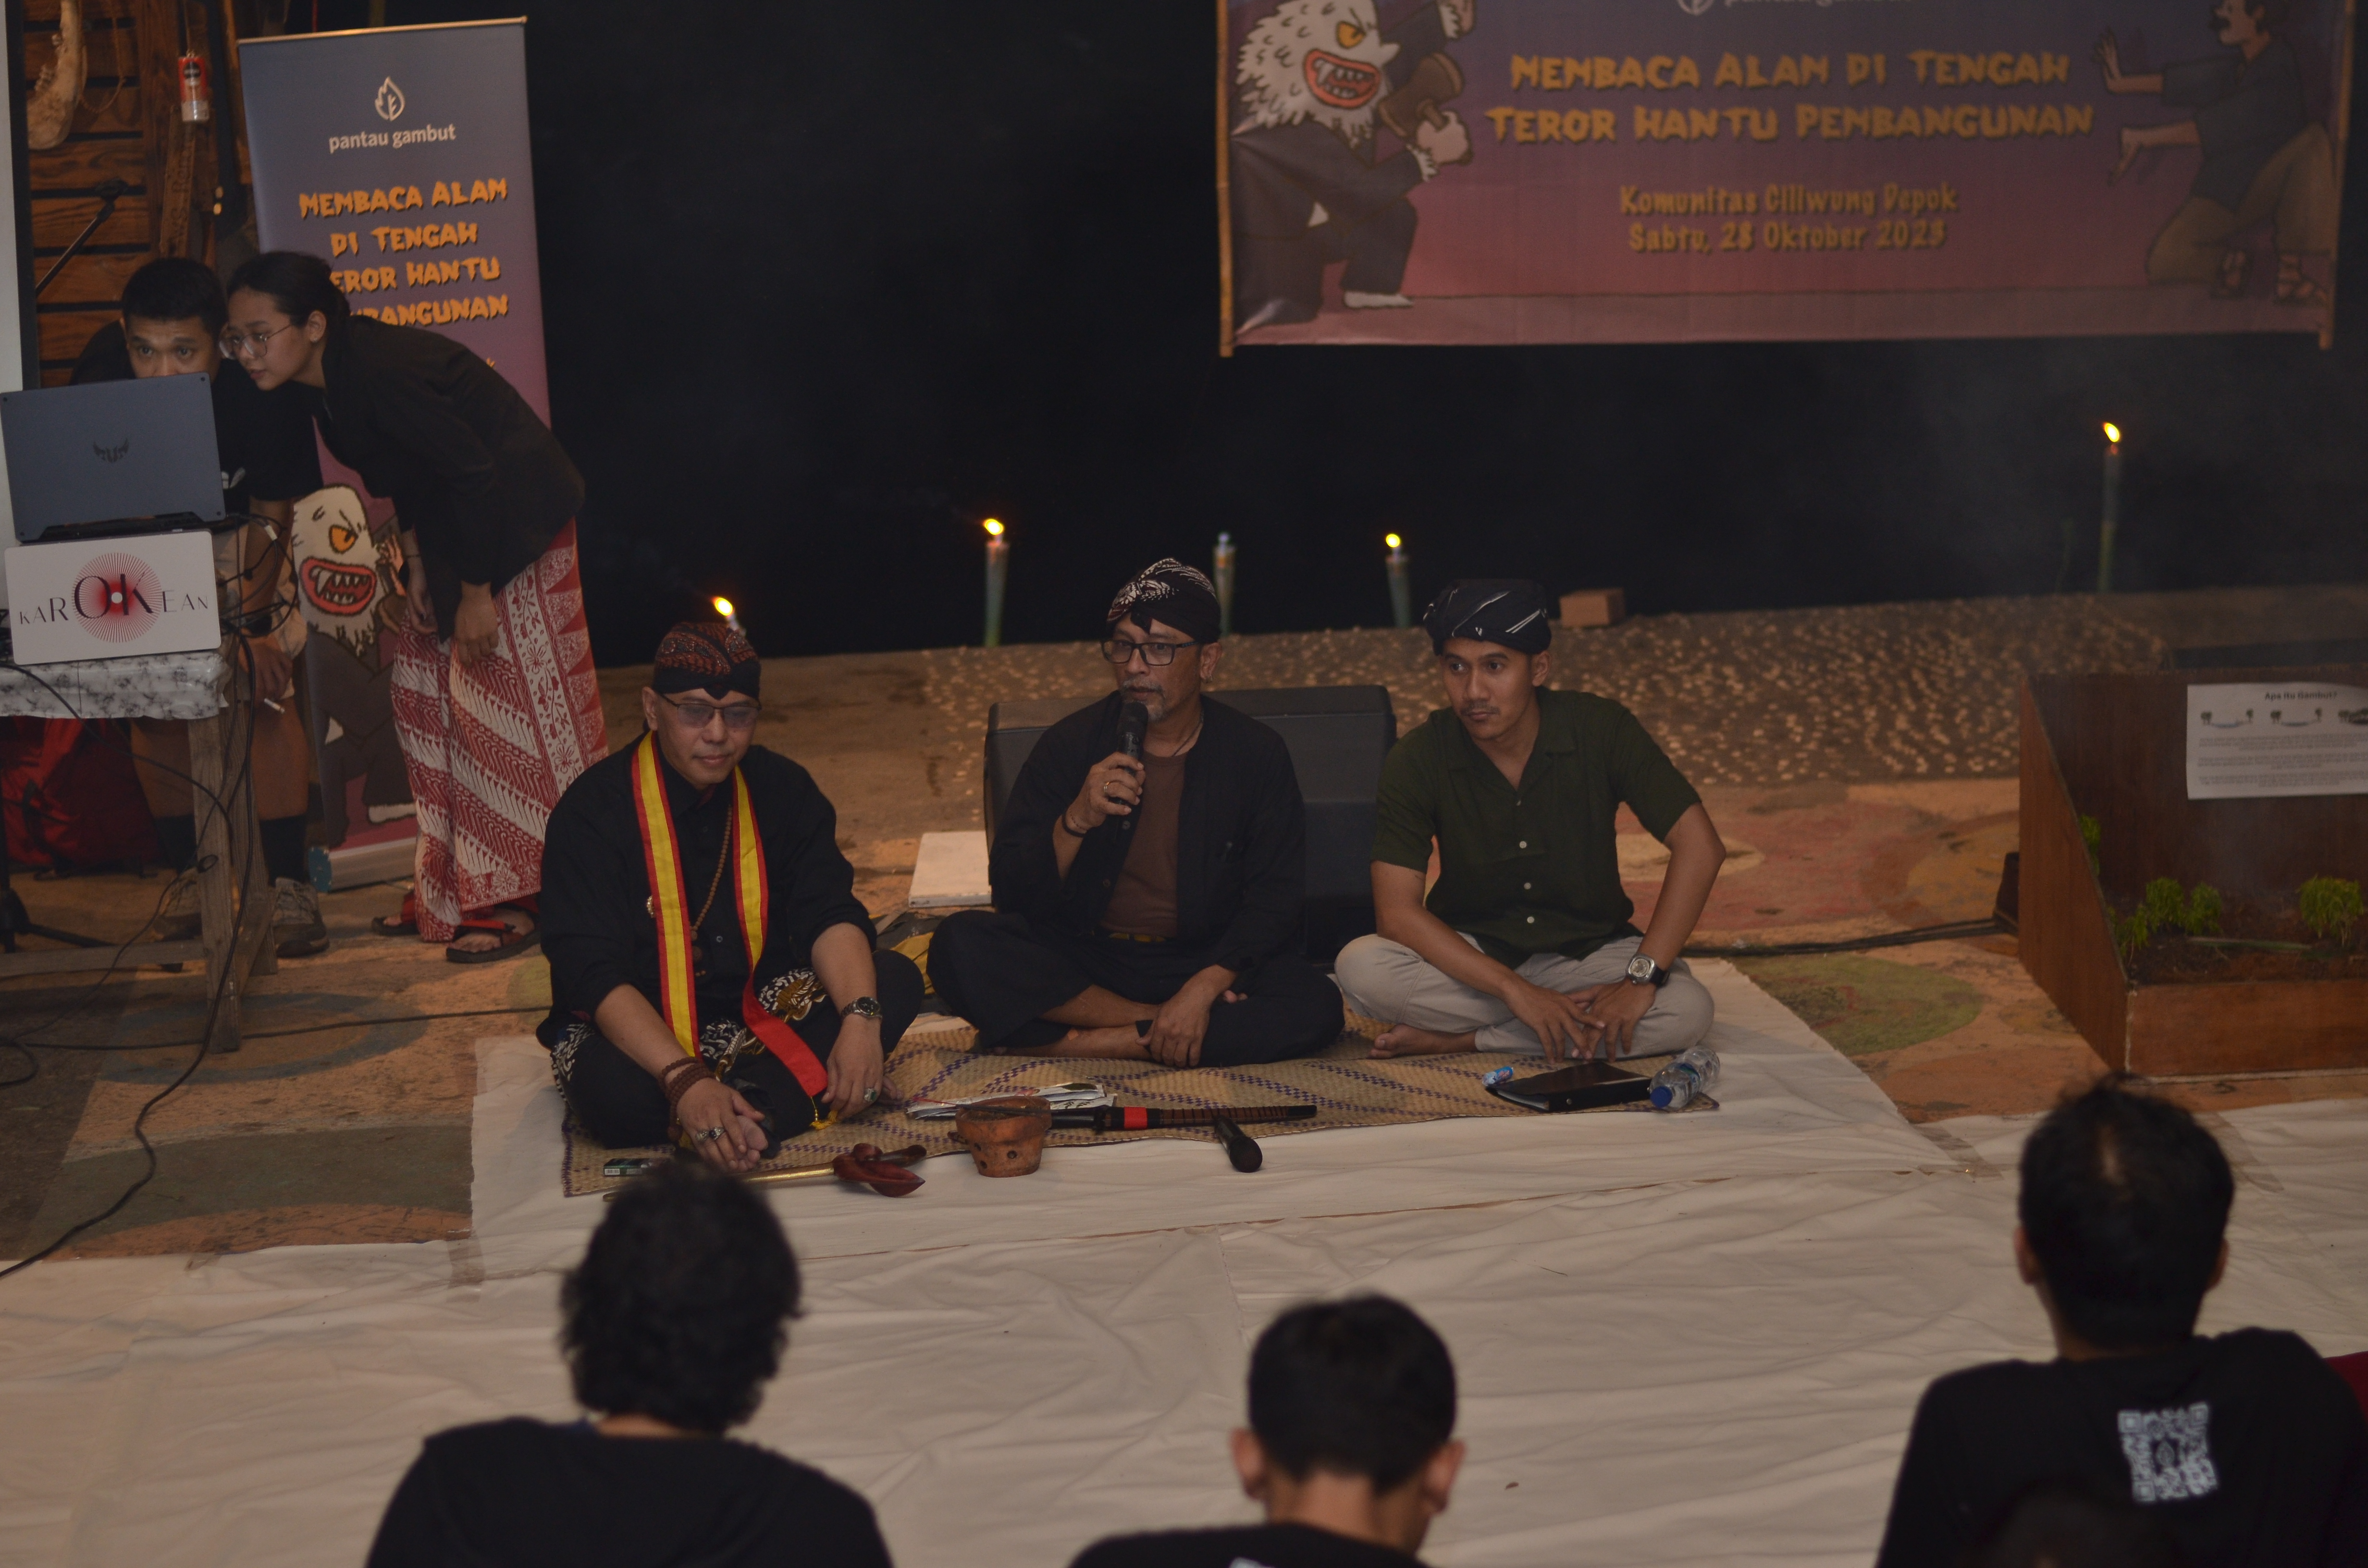 A discussion session featuring (from left to right) Damar Shashangka (author of the novel Sabda Palon), Yuyun Indradi (Cultural Practitioner), and Tommy Utomo (Ciga TV Kasepuhan Gelar Alam).